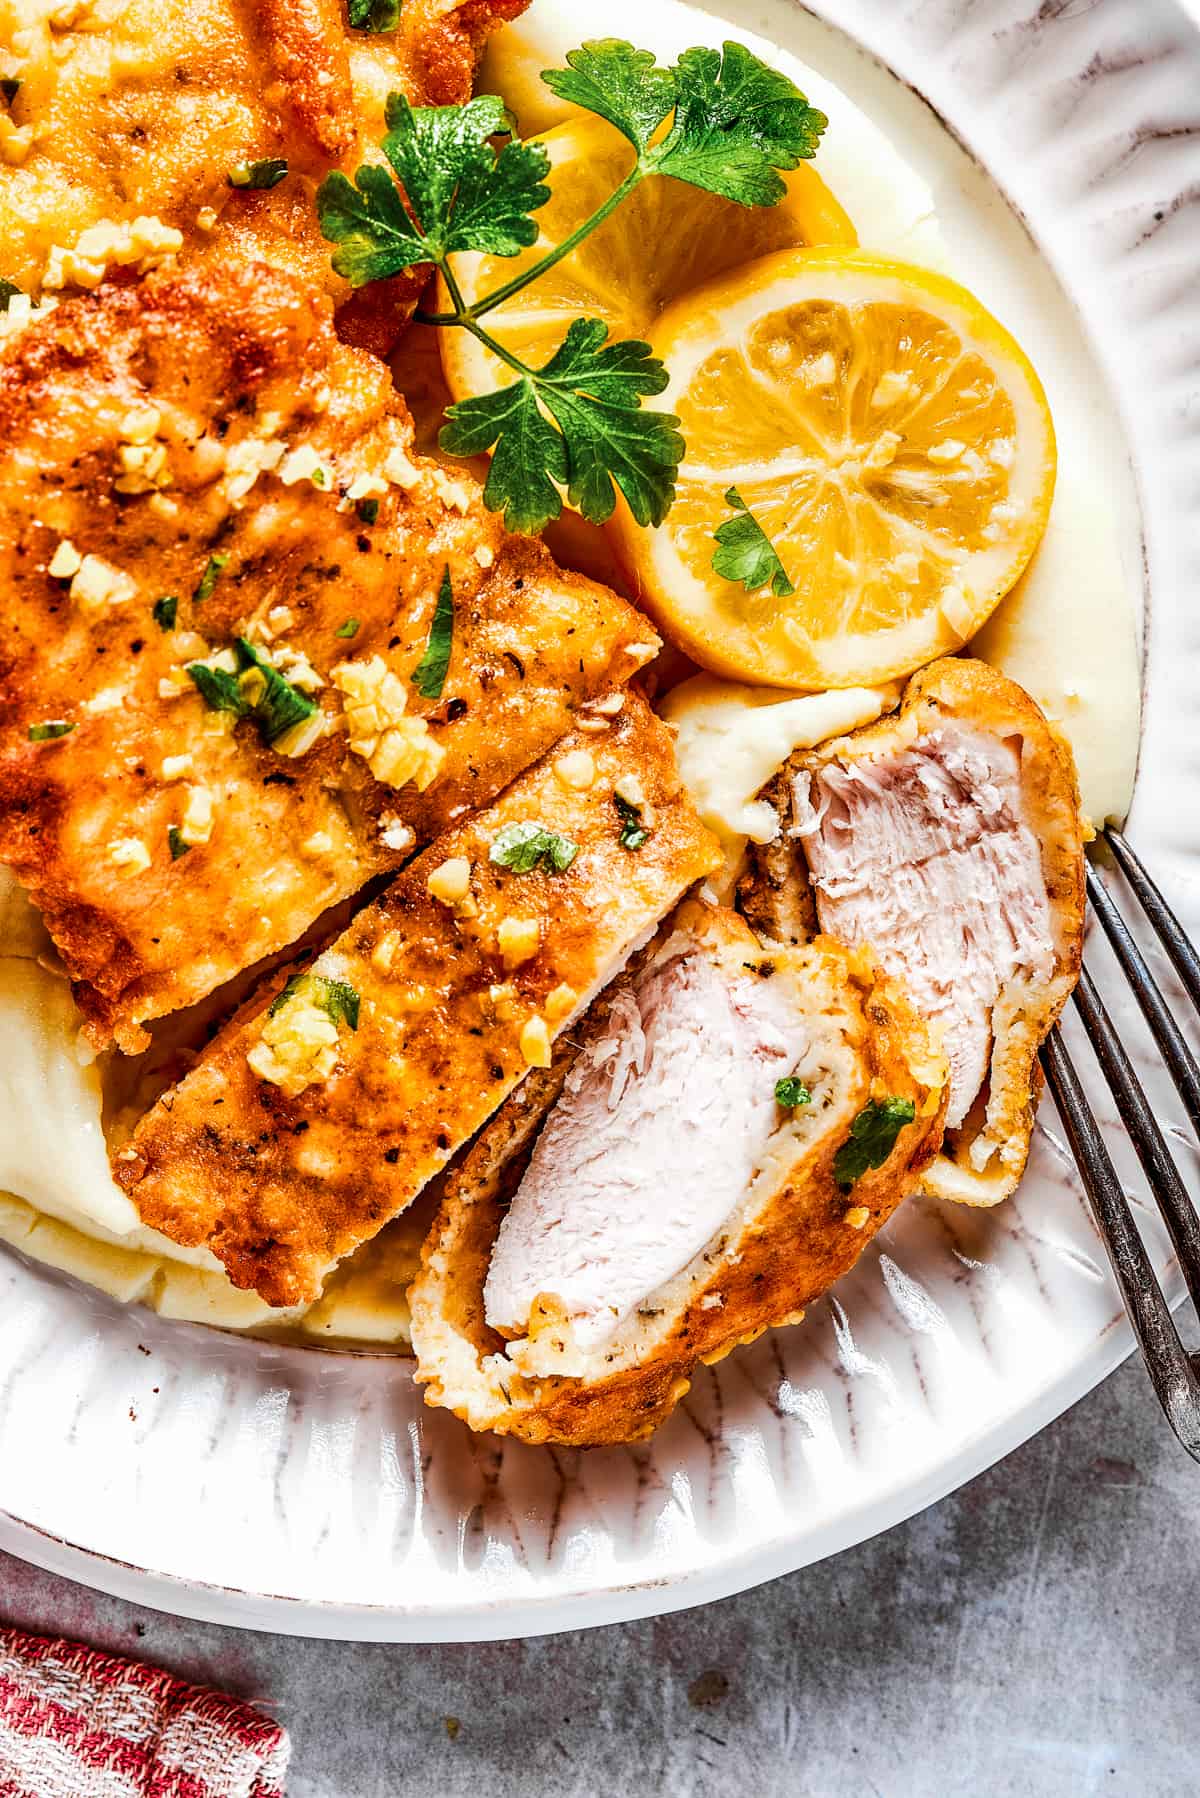 Sliced Breaded chicken with parsley and lemon slices placed next to it.